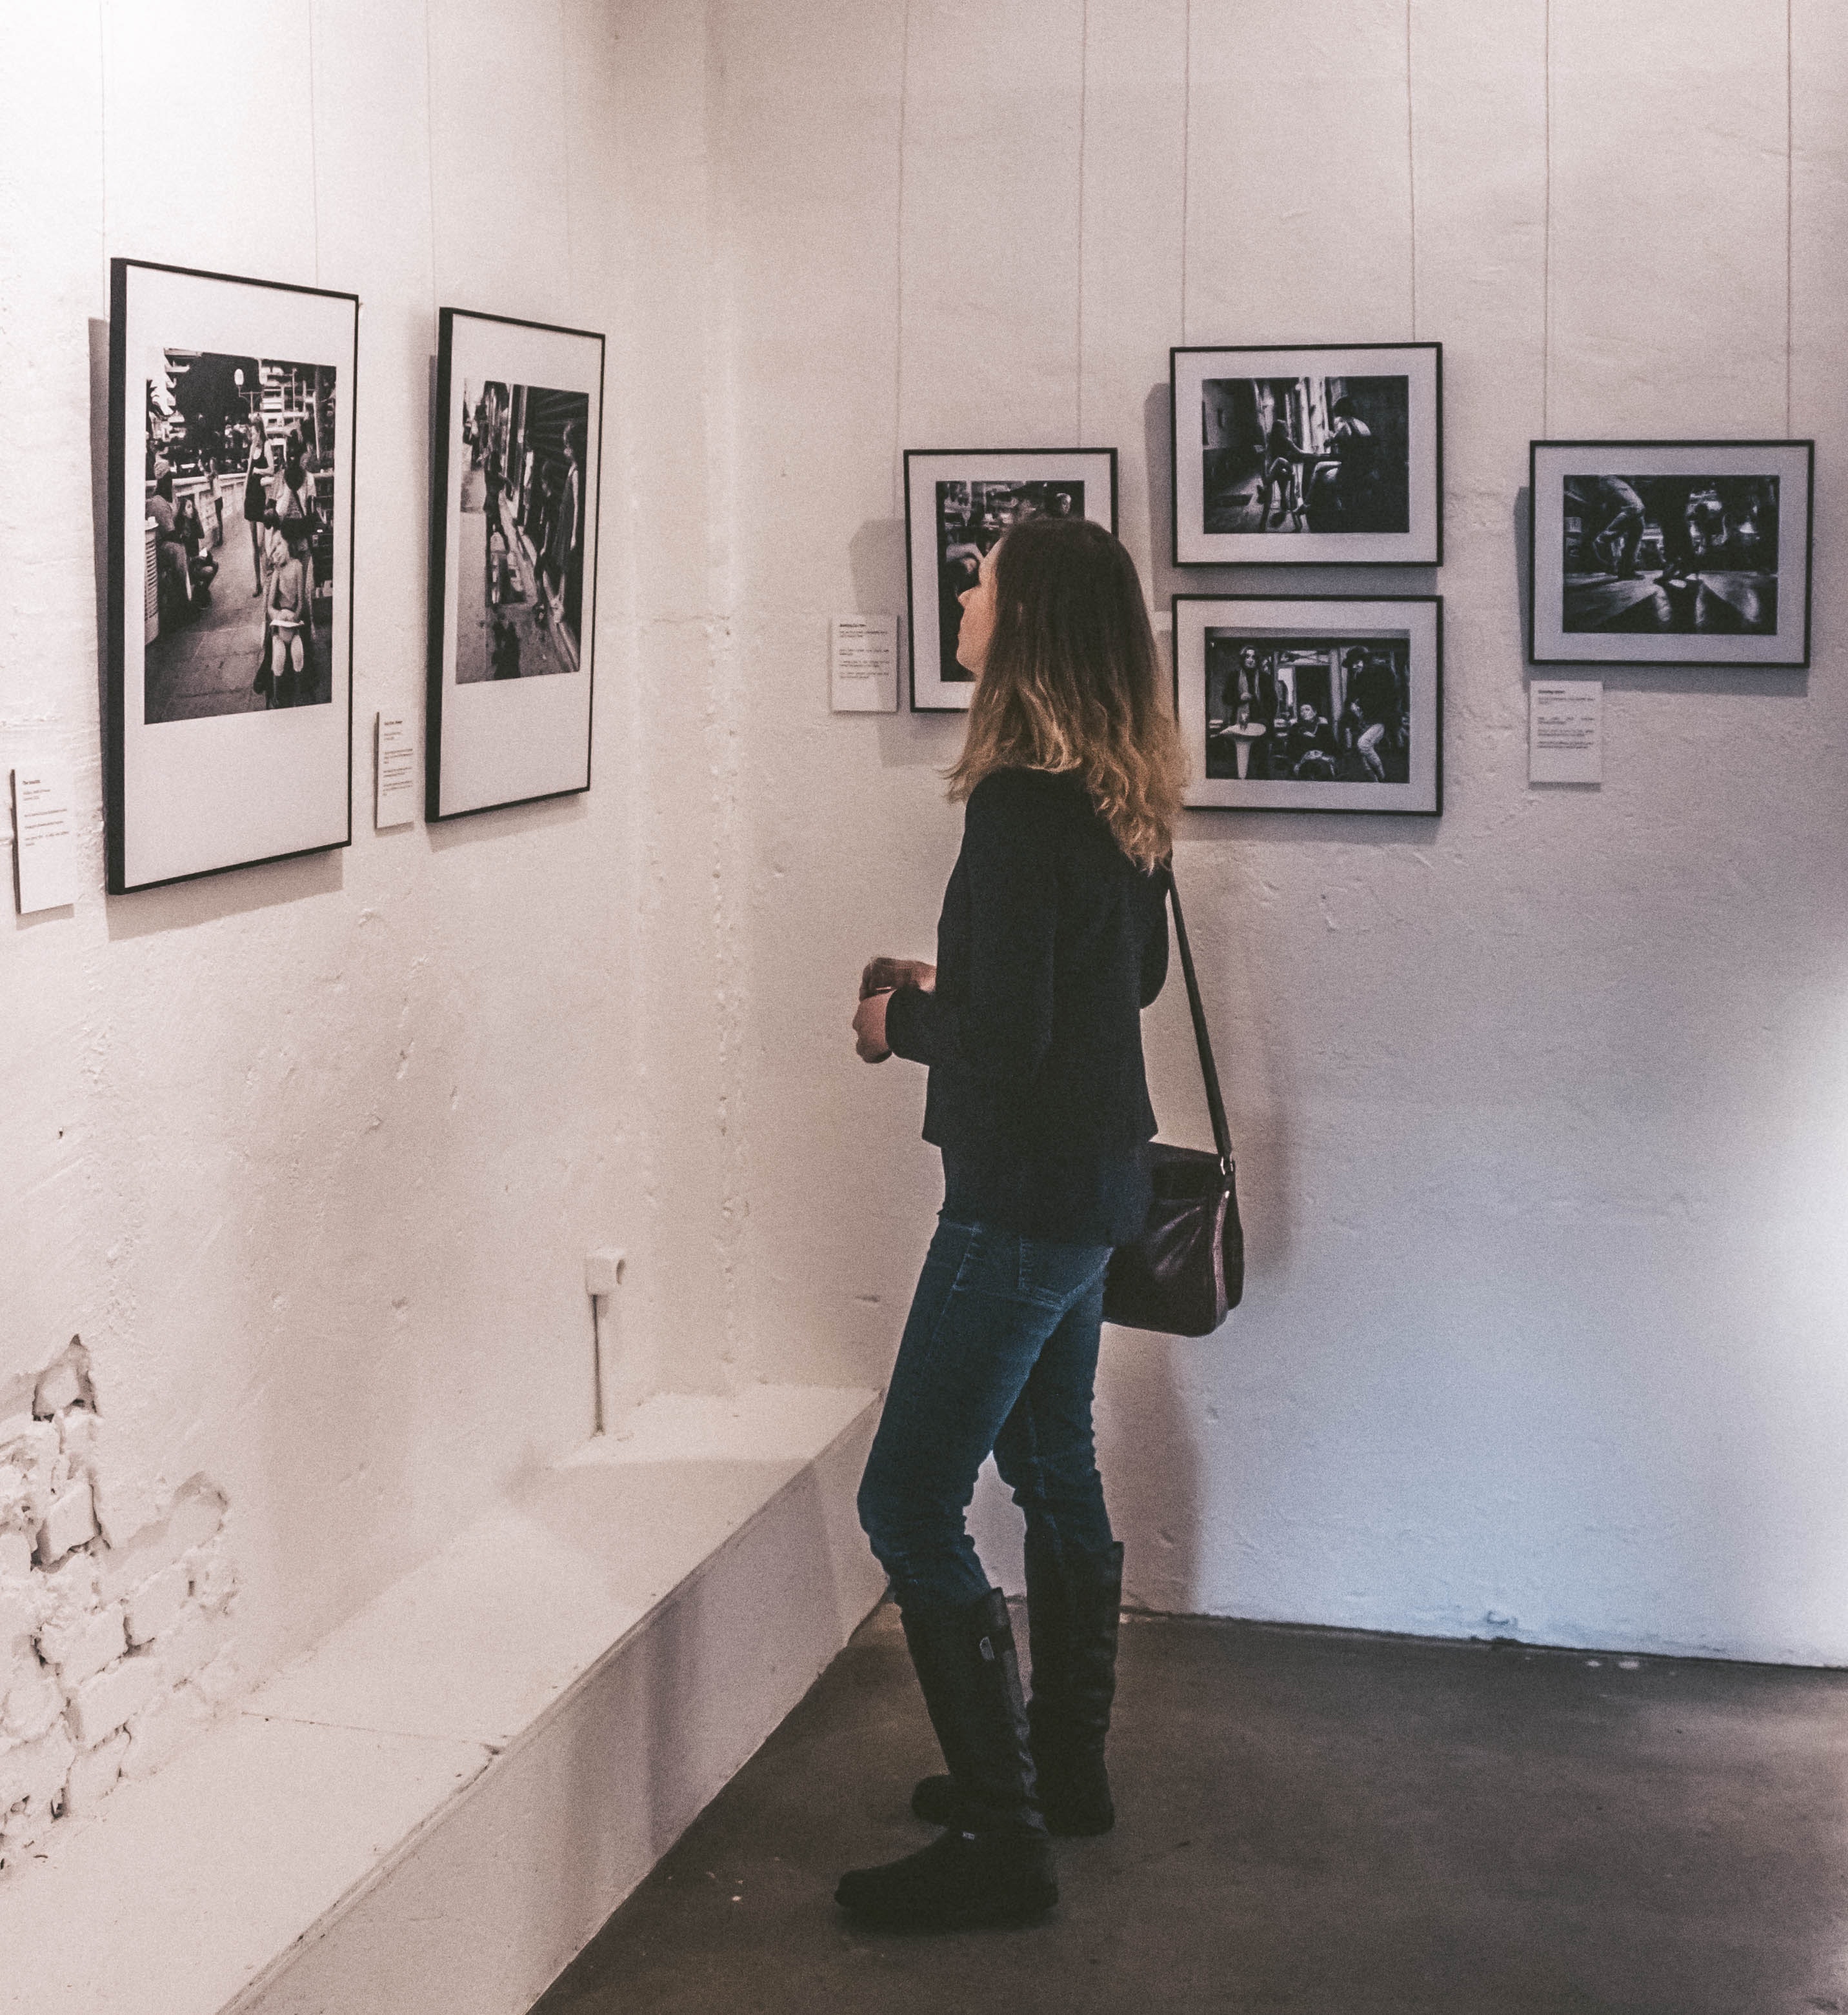 Woman Wearing Black Sweater and Blue Denim Jeans Staring at Paintings Inside Well-lit Room, Adult, Photographs, Wall art, Wall, HQ Photo